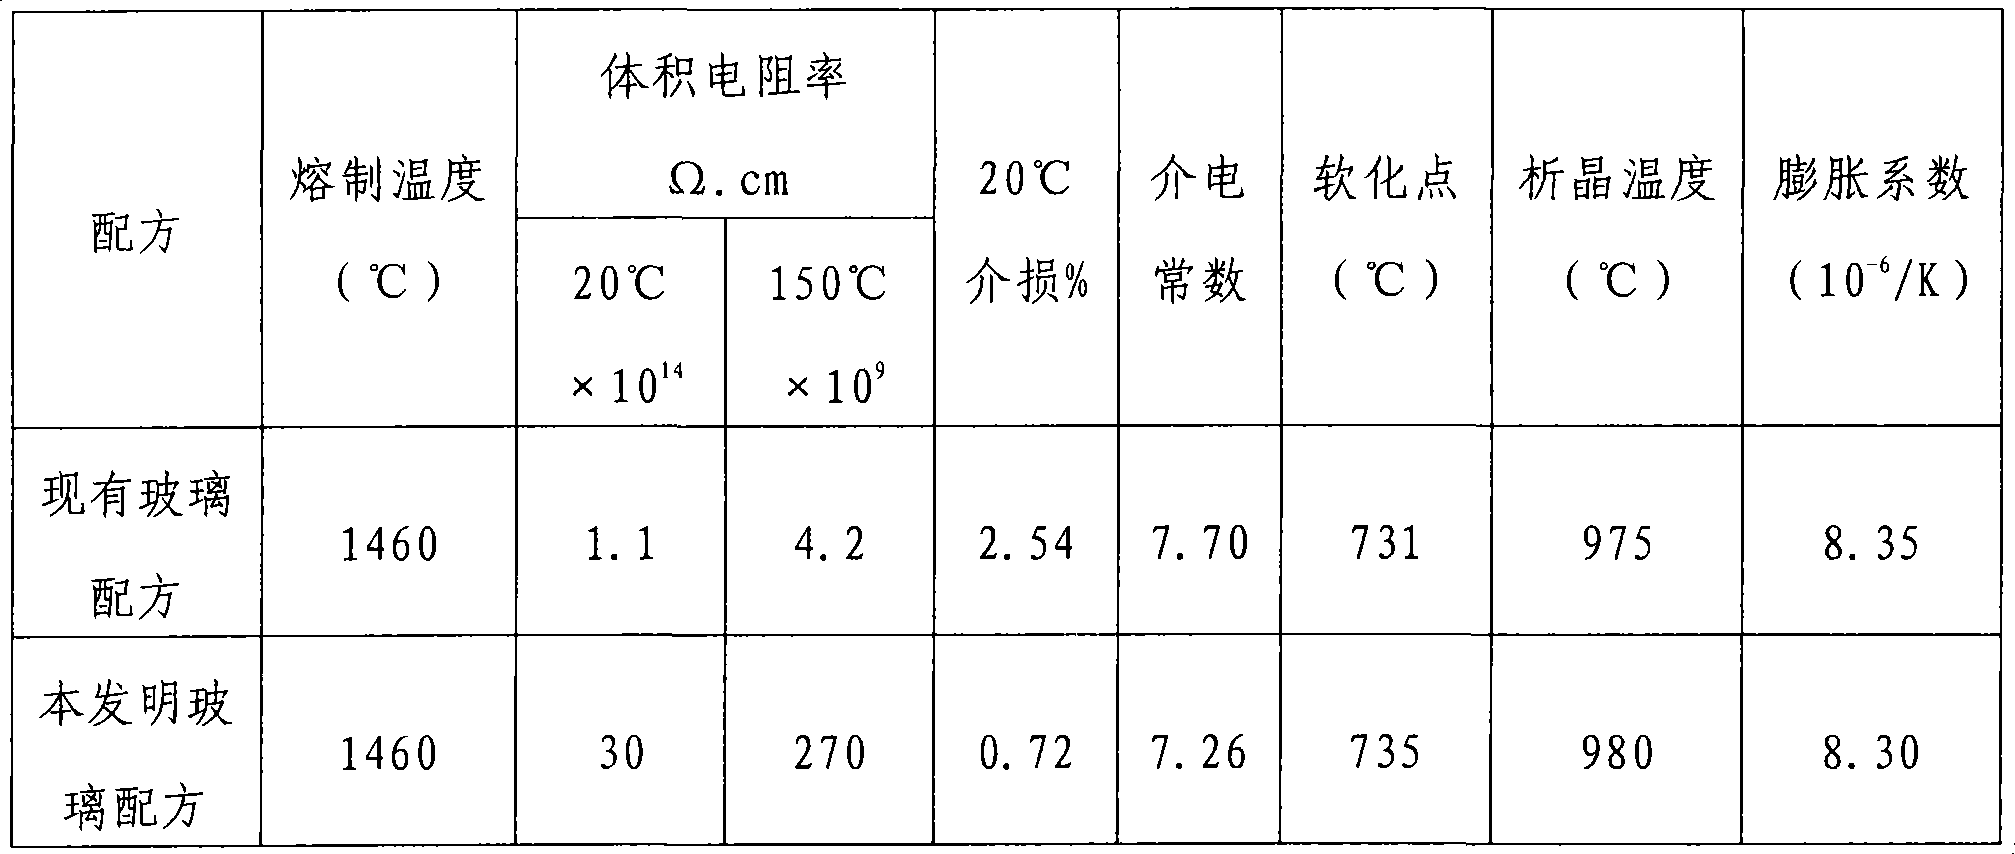 Glass formula for producing direct current glass insulator